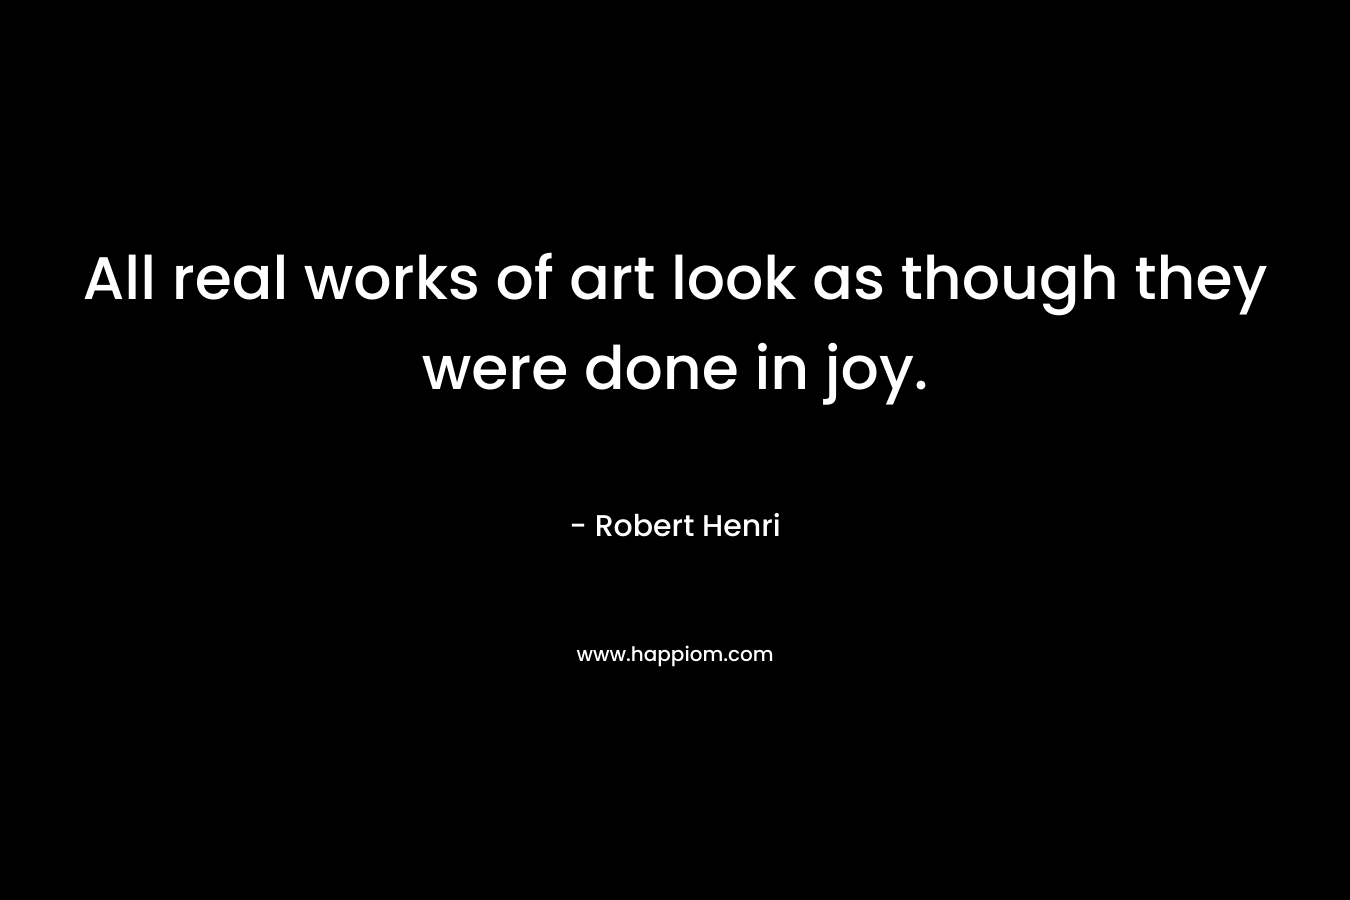 All real works of art look as though they were done in joy.